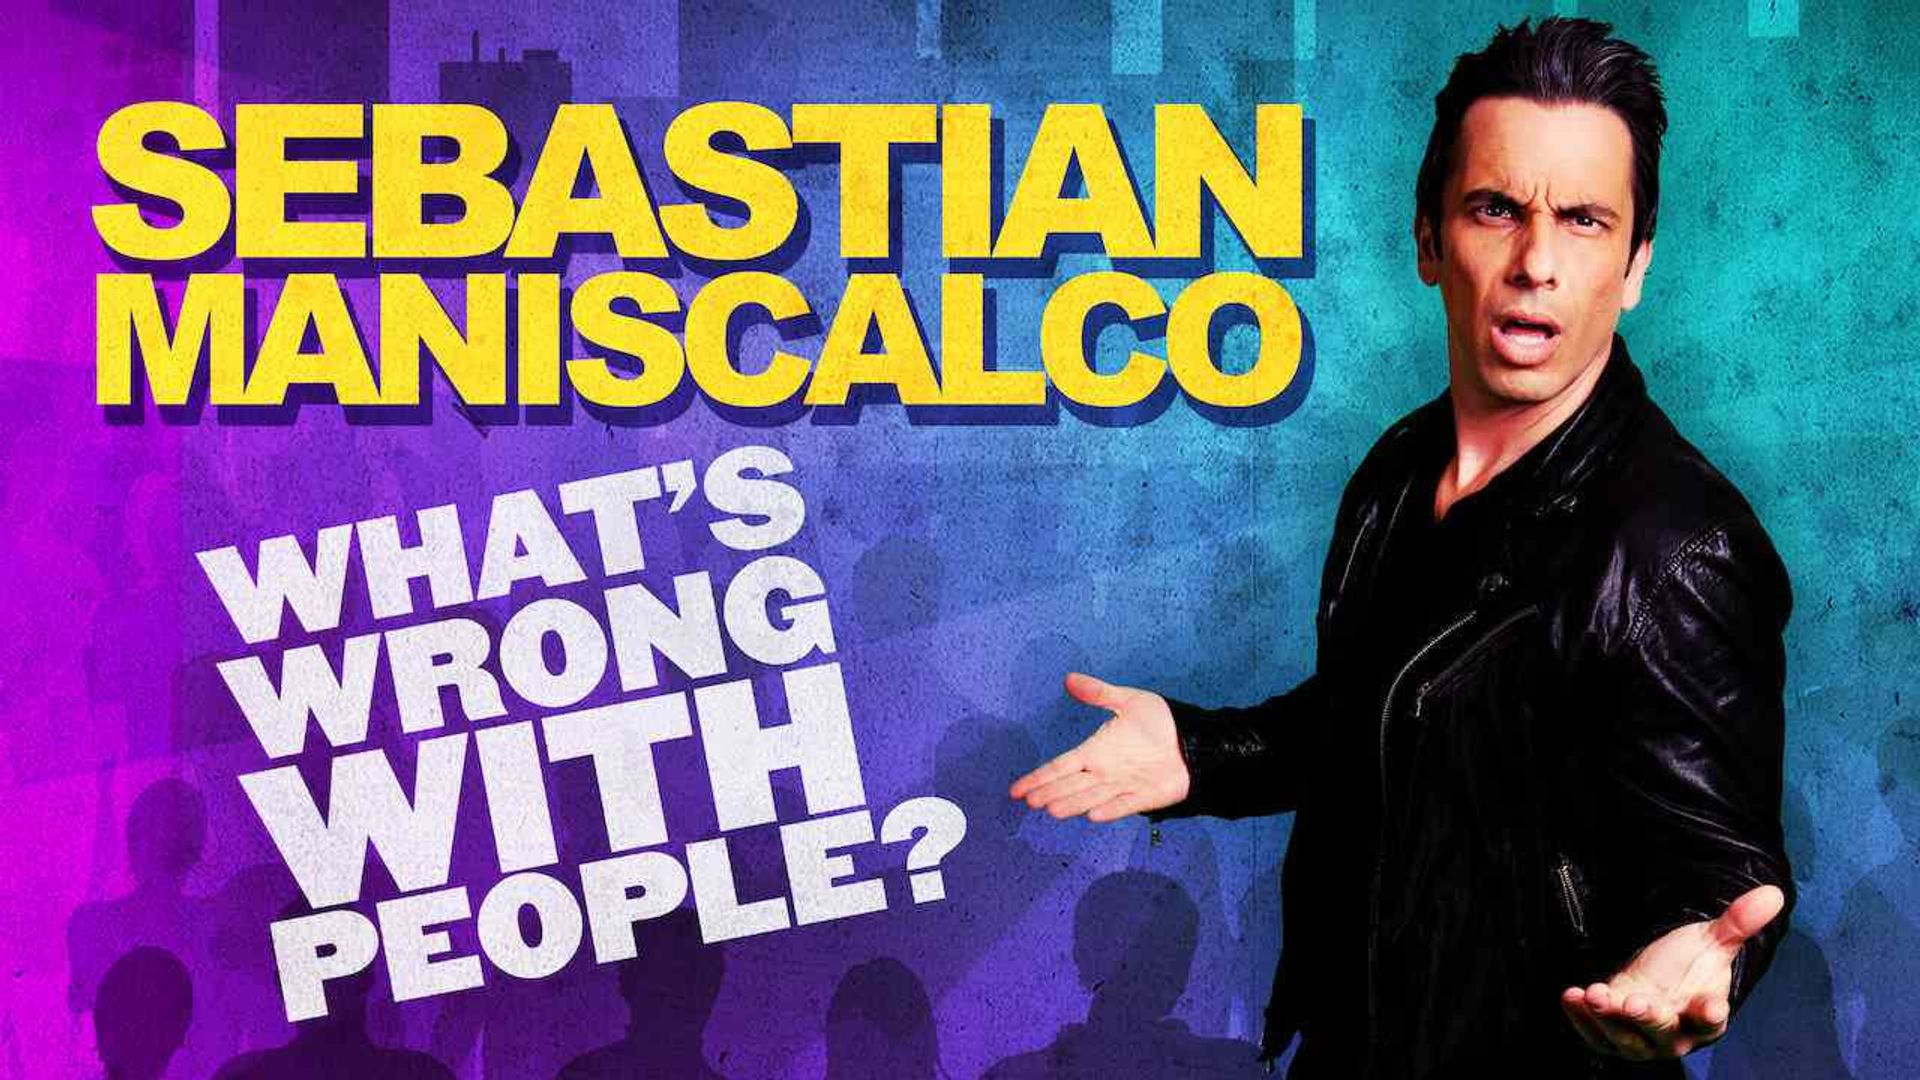 Sebastian Maniscalco: What's Wrong with People? Backdrop